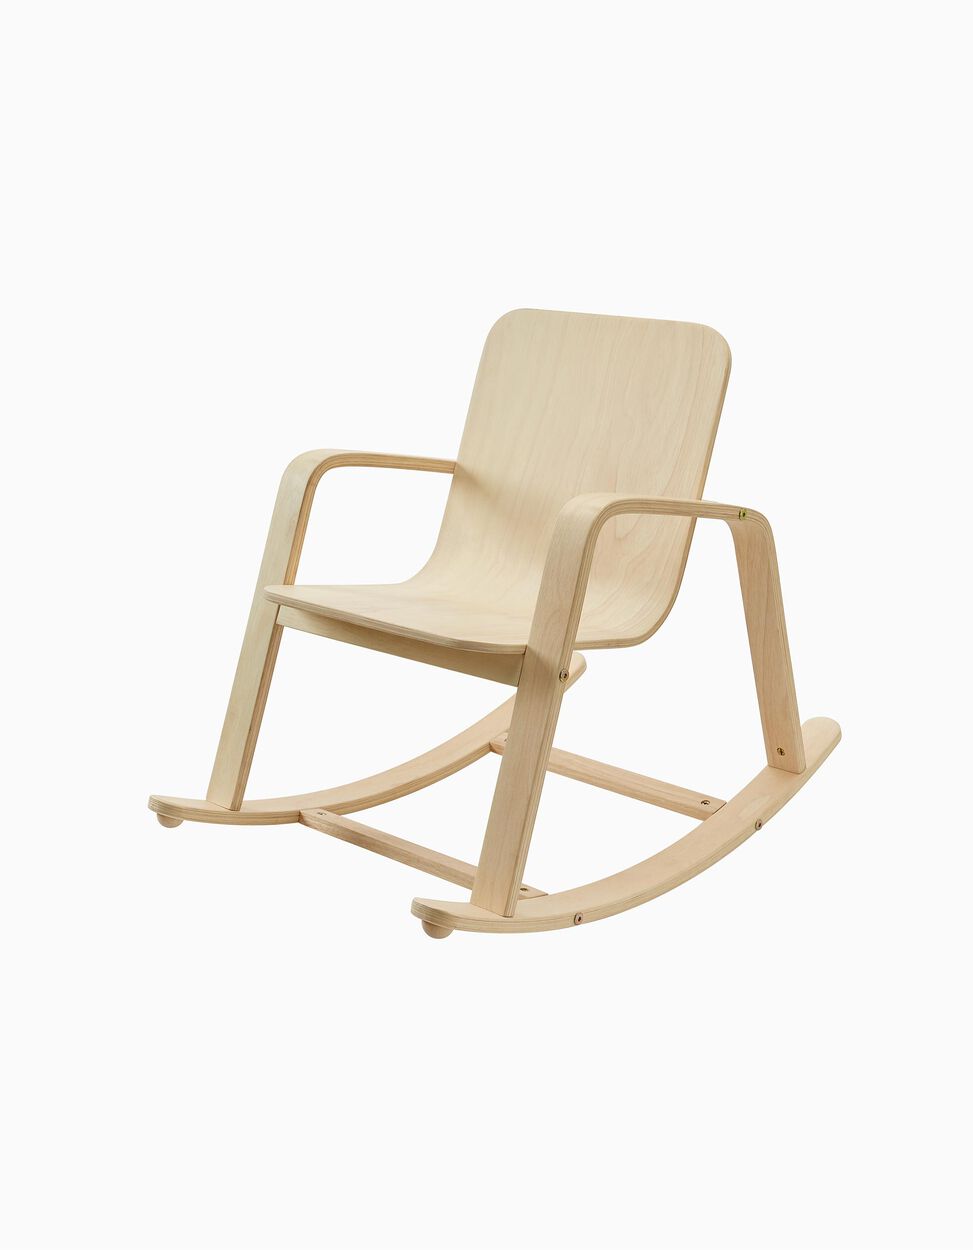 Wooden Rocking Chair Plan Toys 3A+